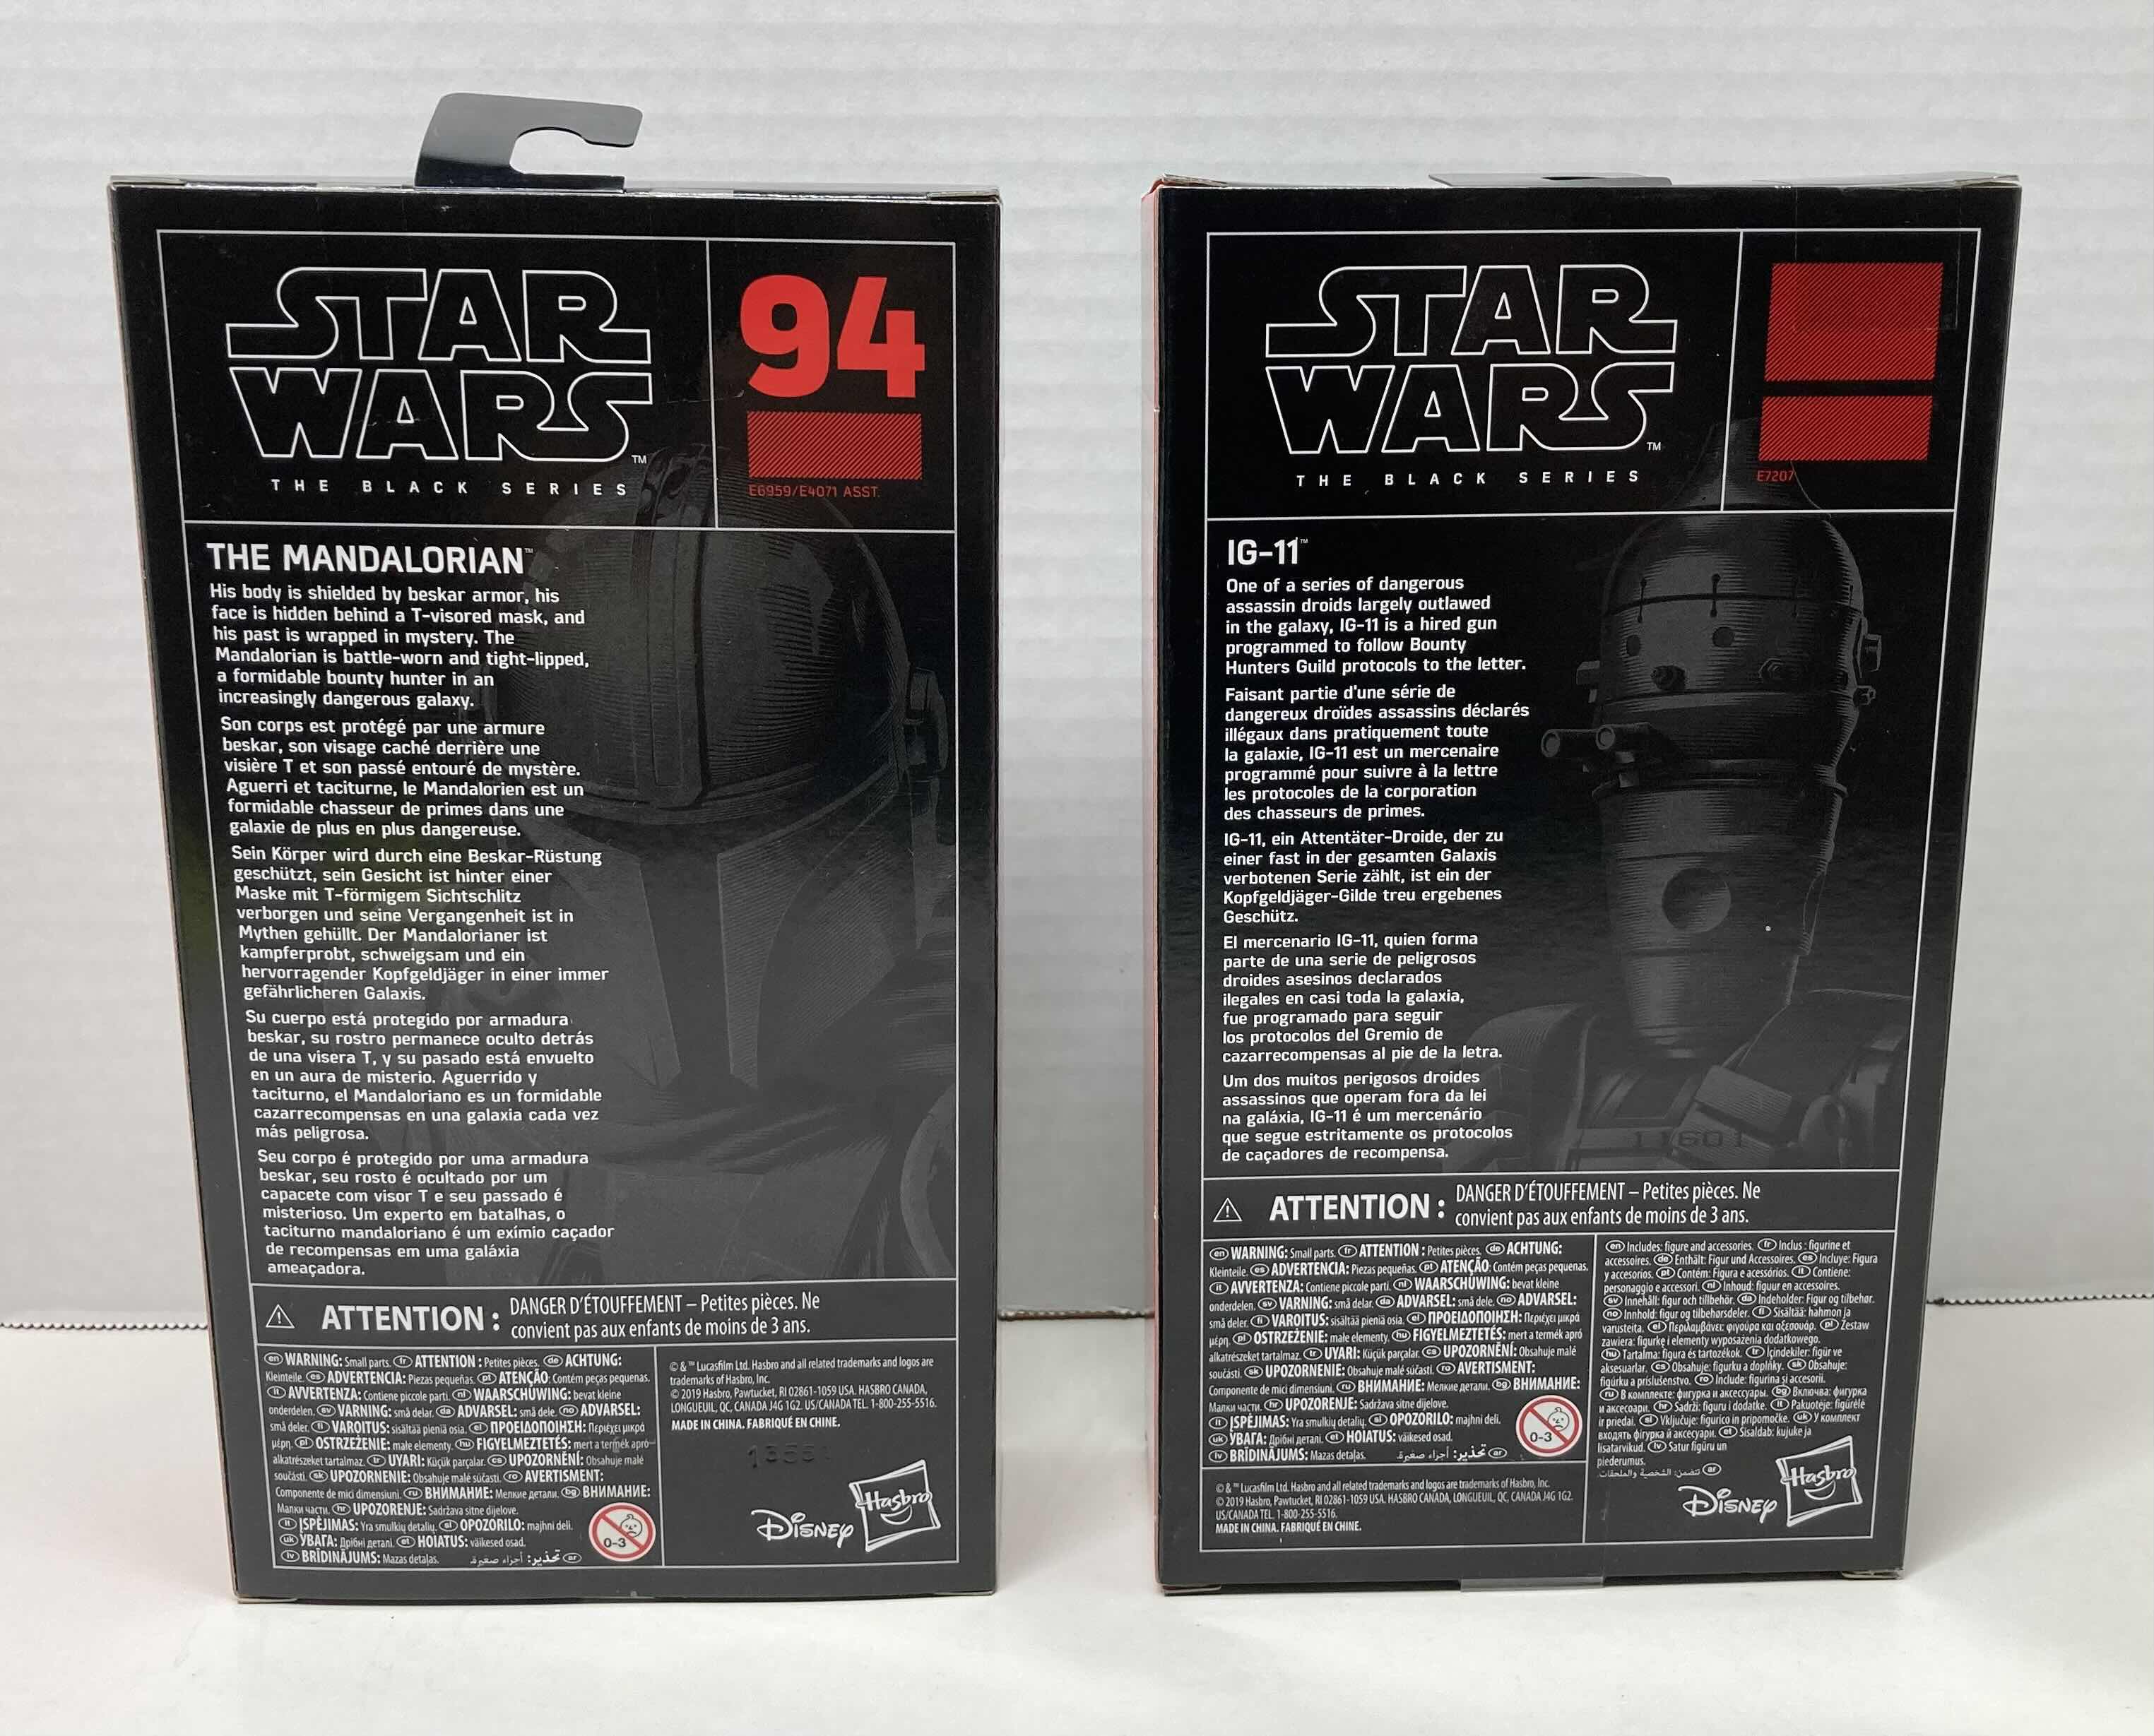 Photo 2 of NEW STAR WARS BLACK SERIES 2-PACK ACTION FIGURES, THE MANDALORIAN & IG-11